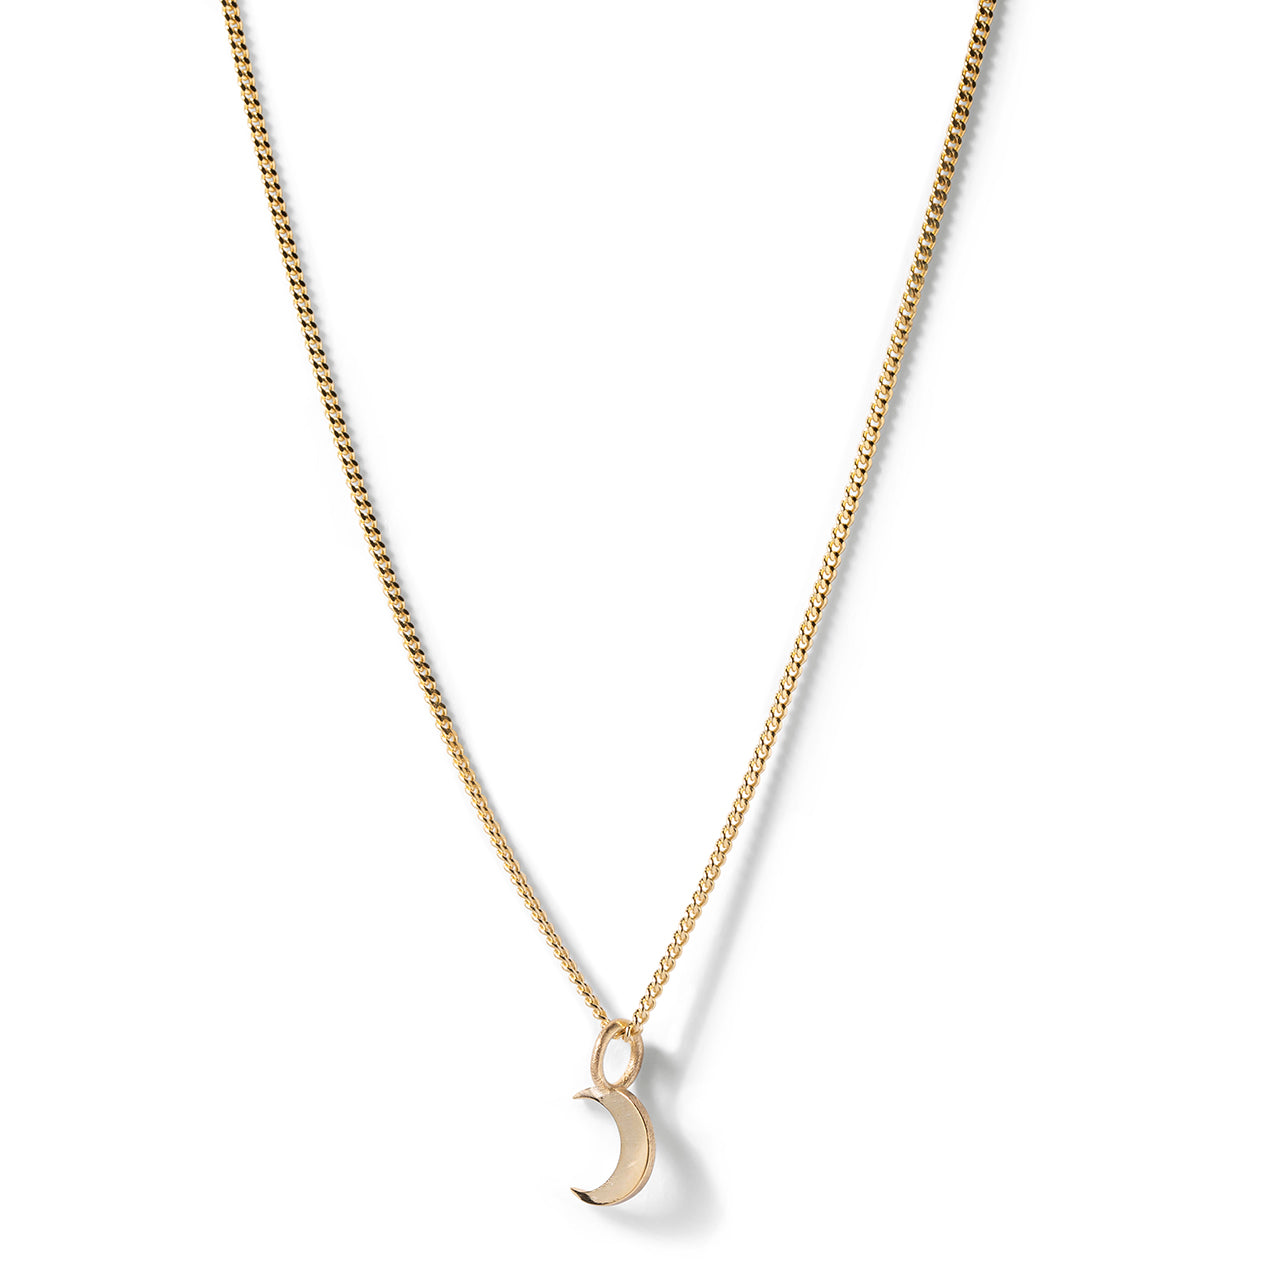 Moon Charm Necklace